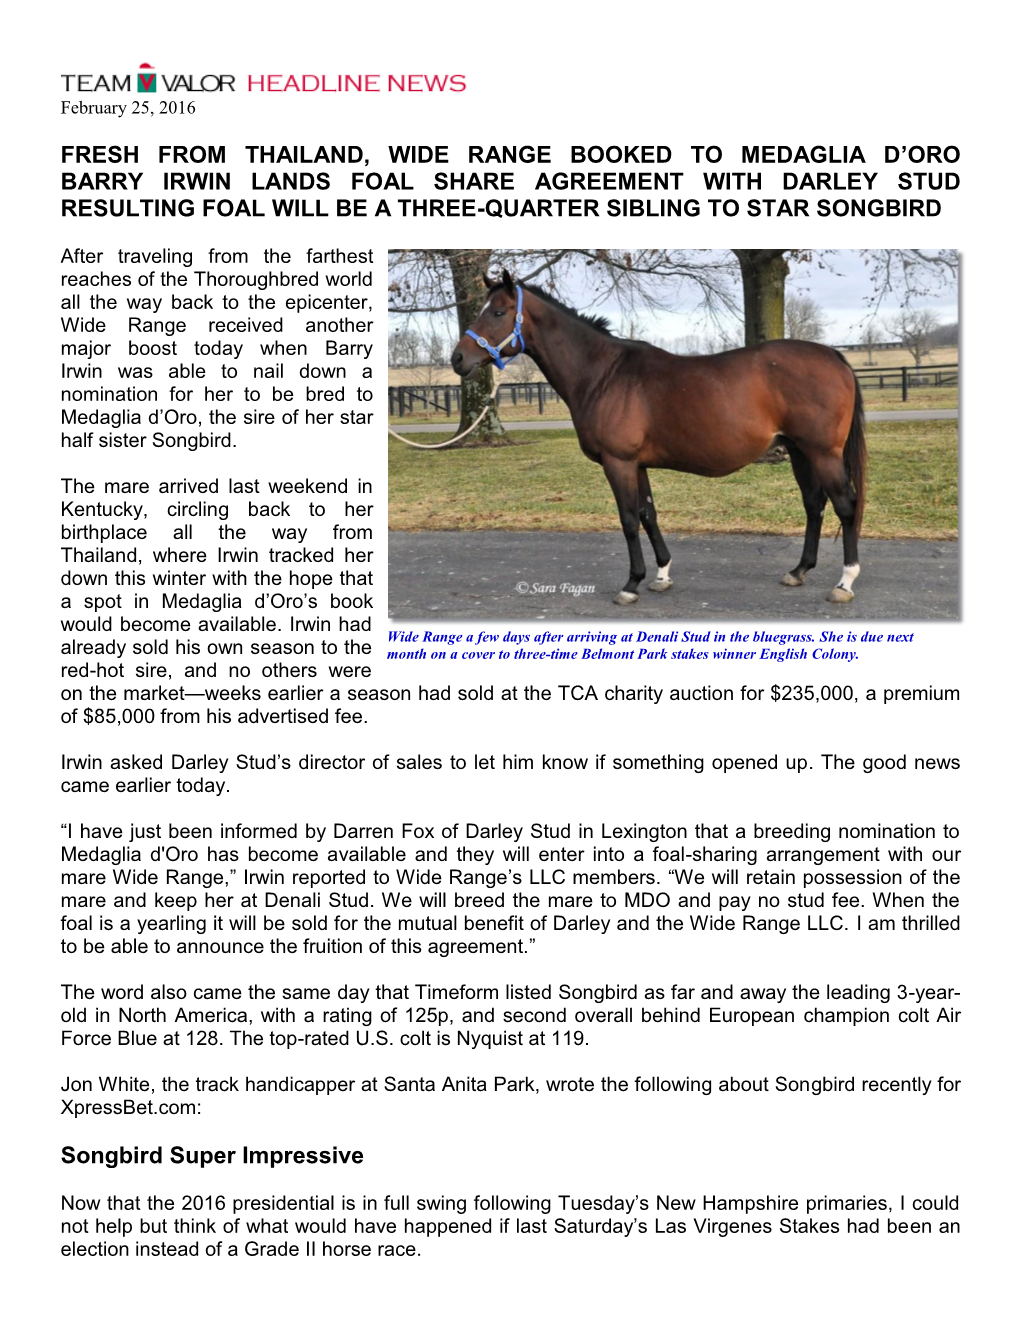 Fresh from Thailand, Wide Range Booked to Medaglia D